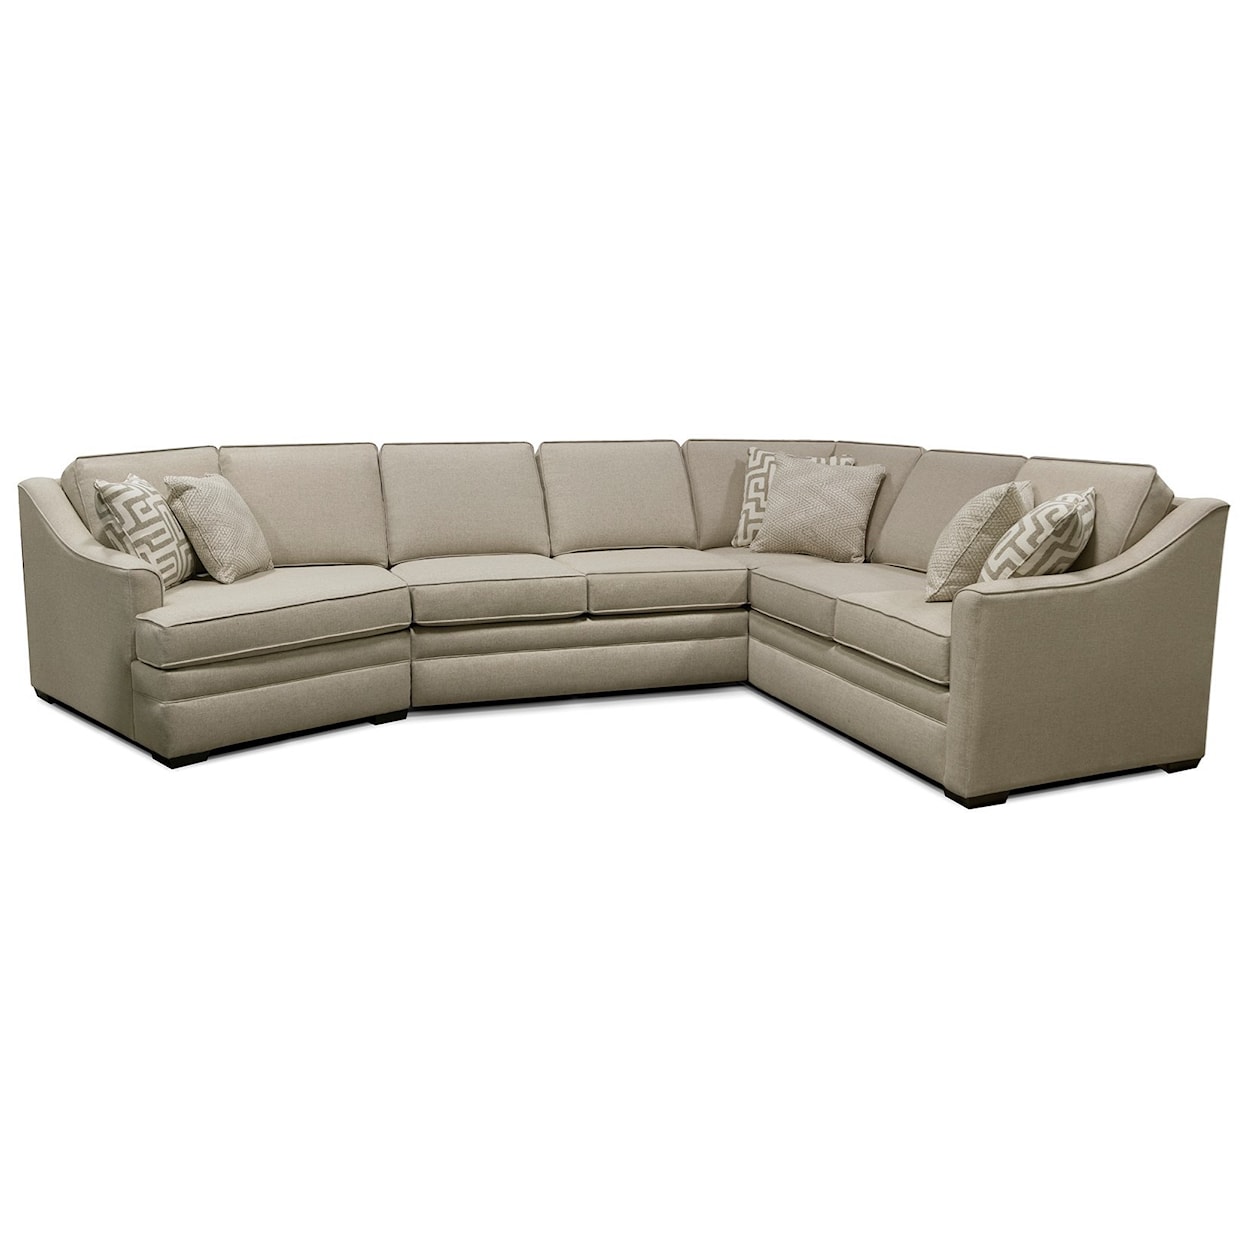 Tennessee Custom Upholstery 4T00 Series Sectional Sofa with Five Seats